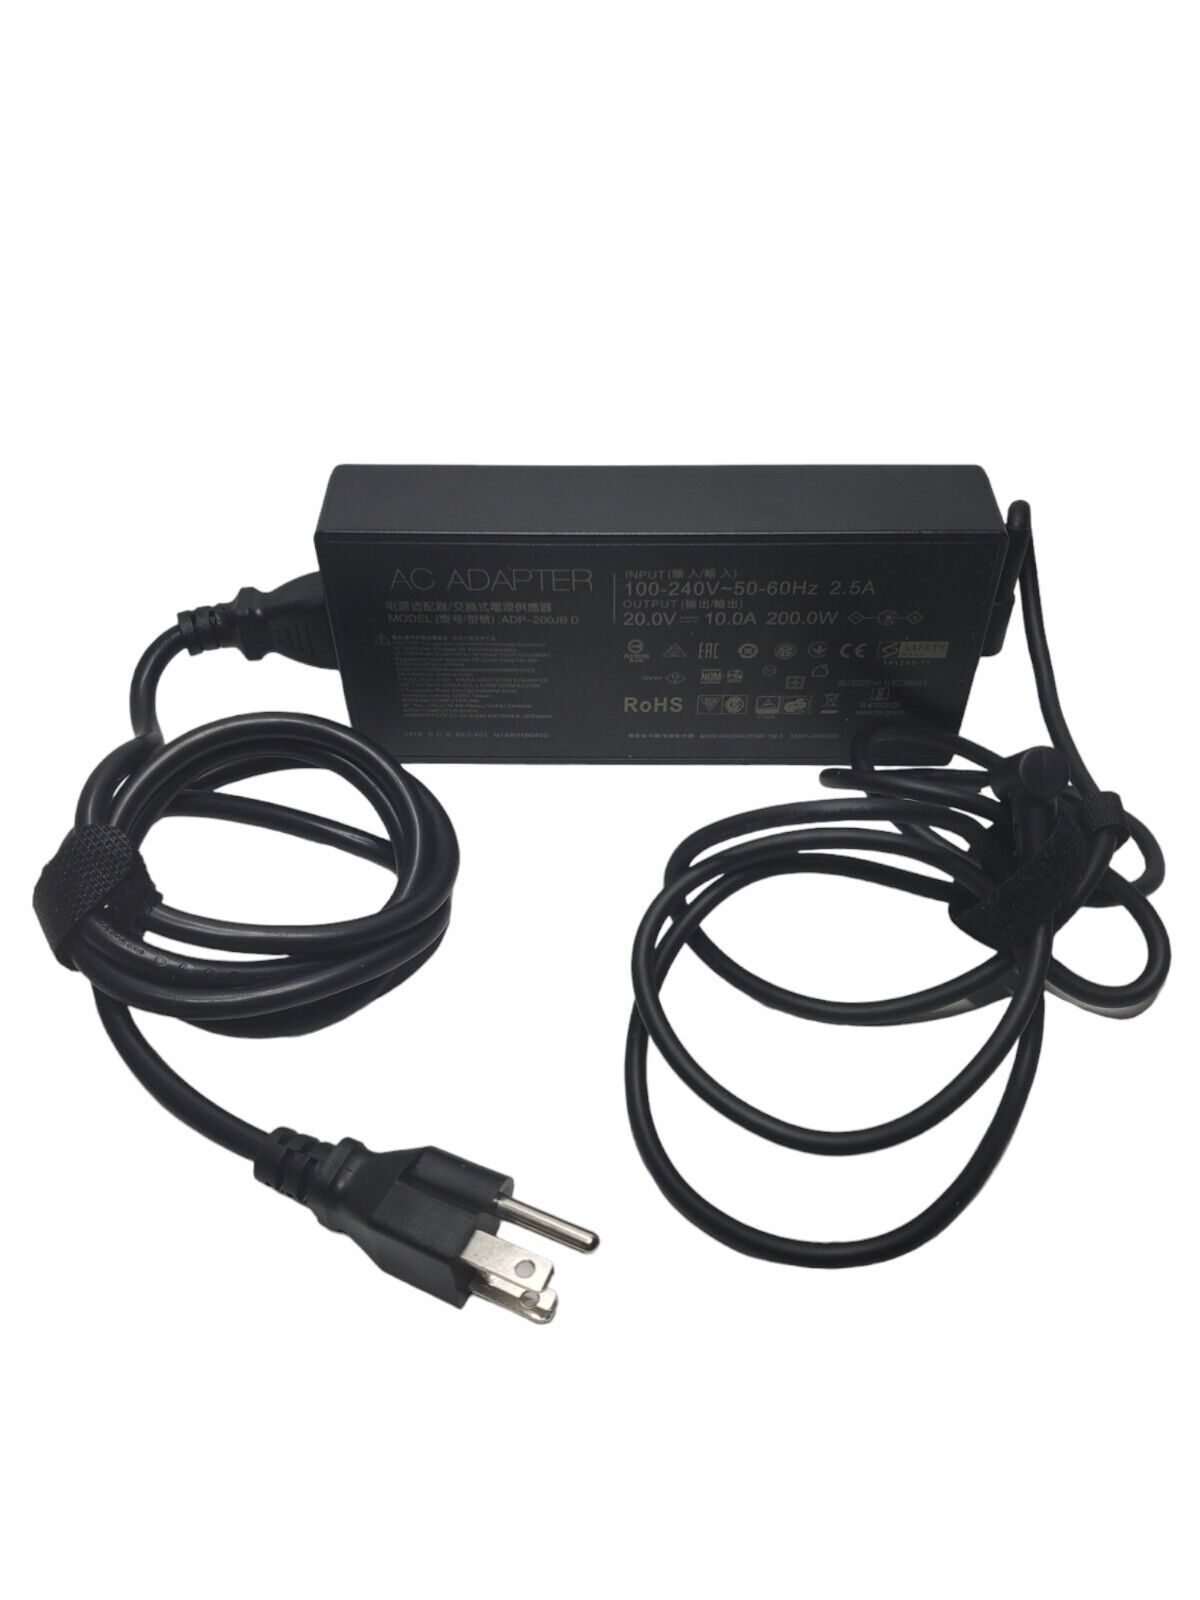 For Asus ADP-200JB D 200W 20V 10A AC Adapter Charger